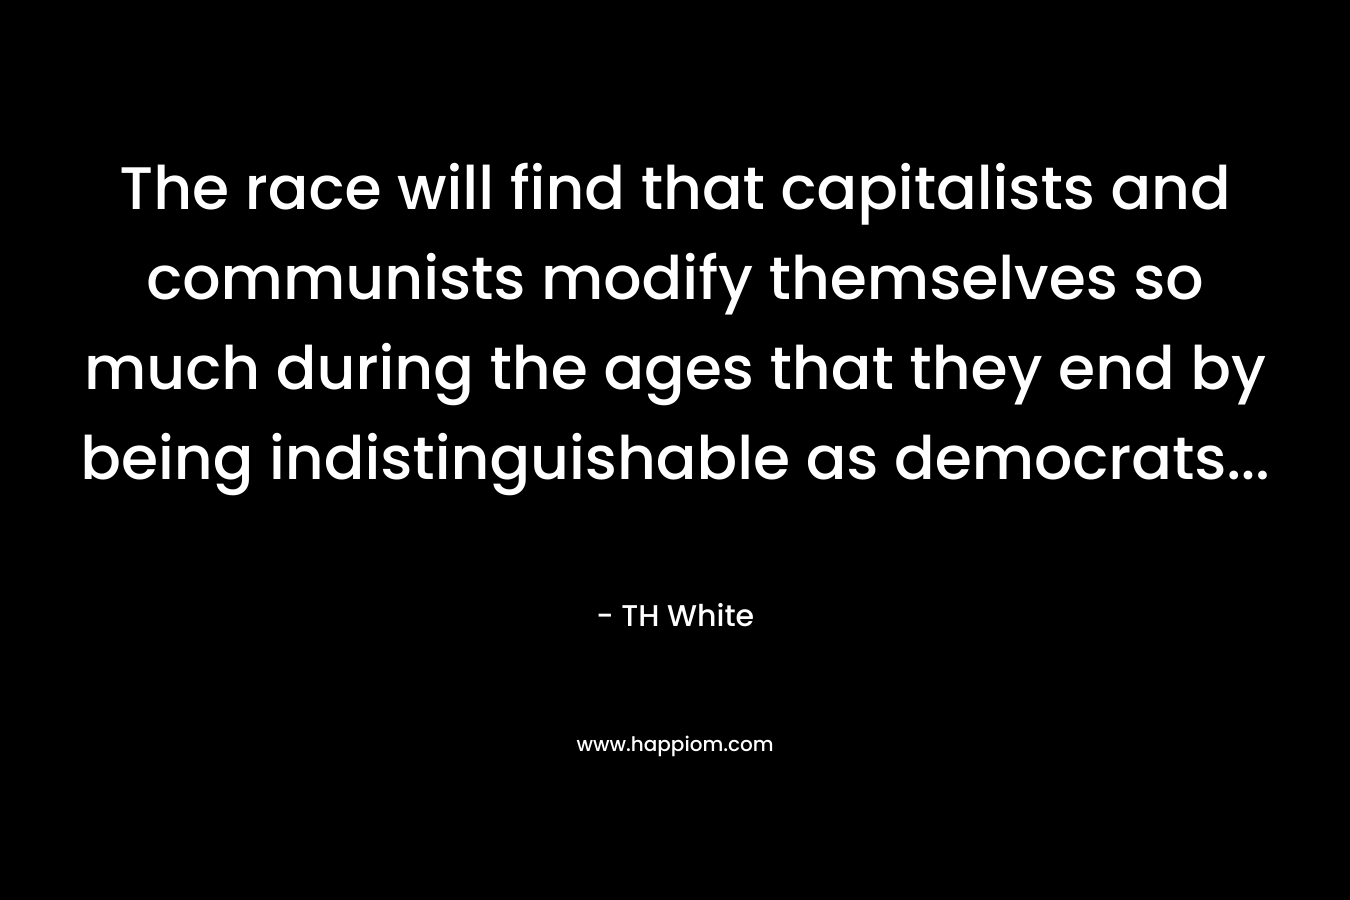 The race will find that capitalists and communists modify themselves so much during the ages that they end by being indistinguishable as democrats...